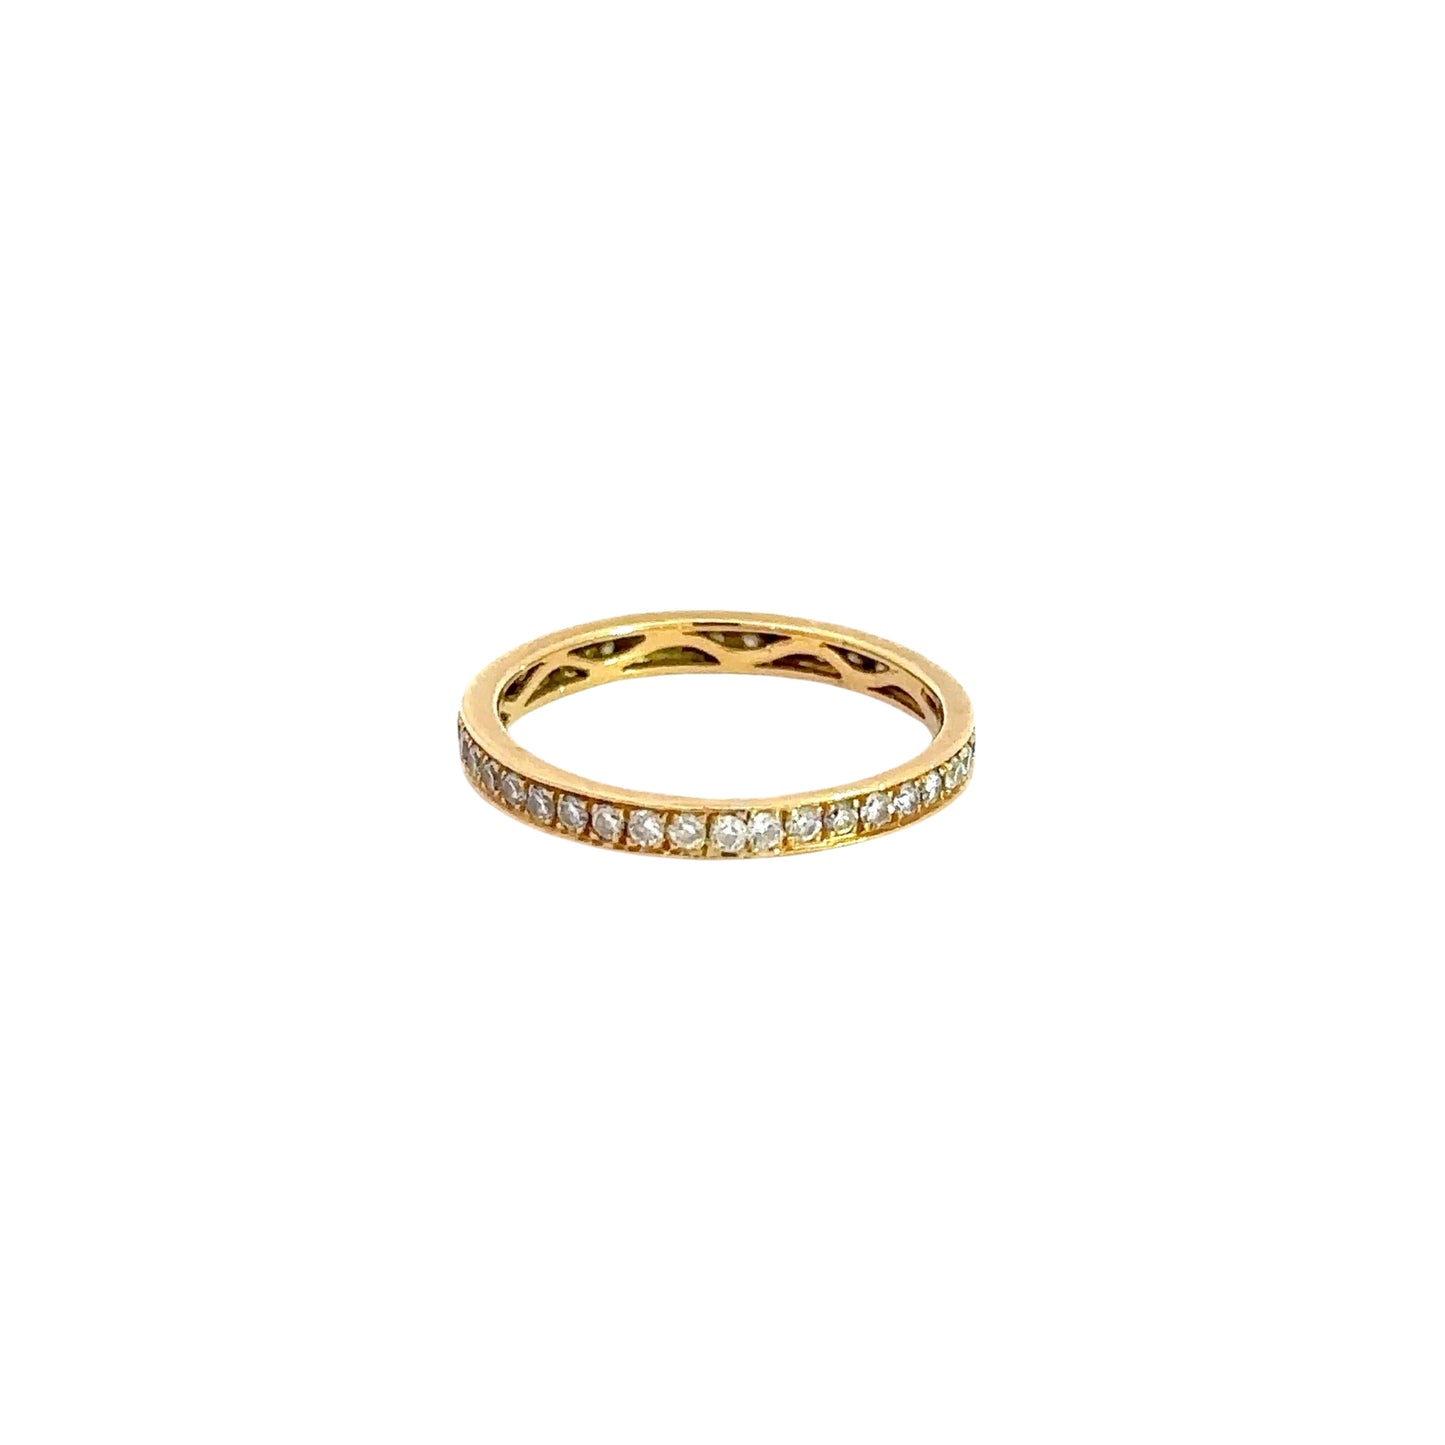 Back of yellow gold ring with small round diamonds.